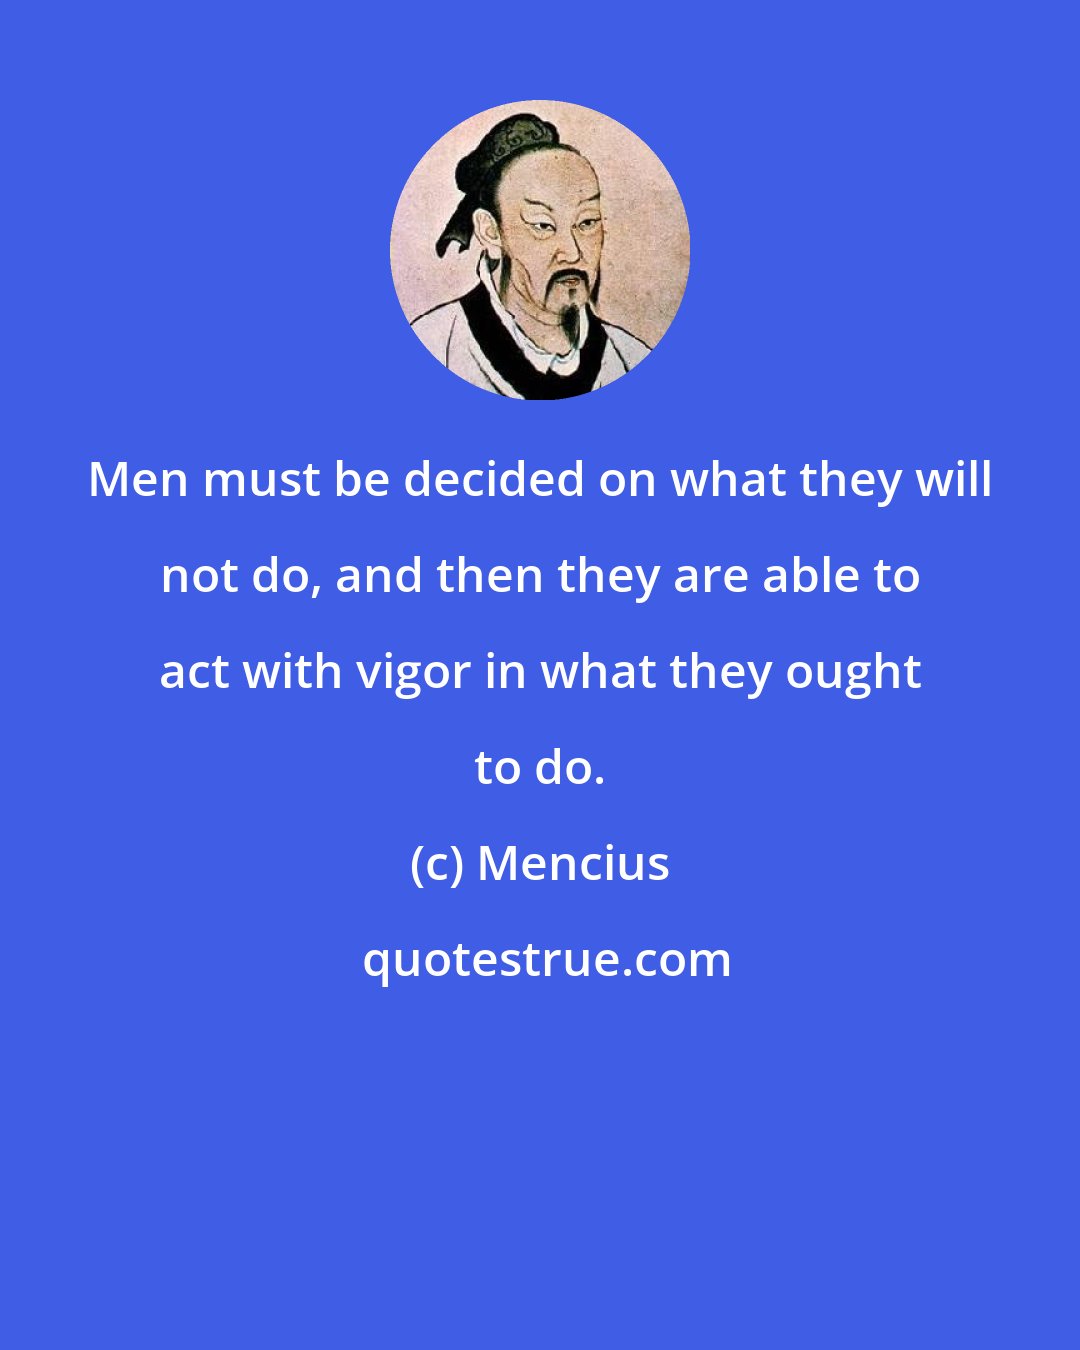 Mencius: Men must be decided on what they will not do, and then they are able to act with vigor in what they ought to do.